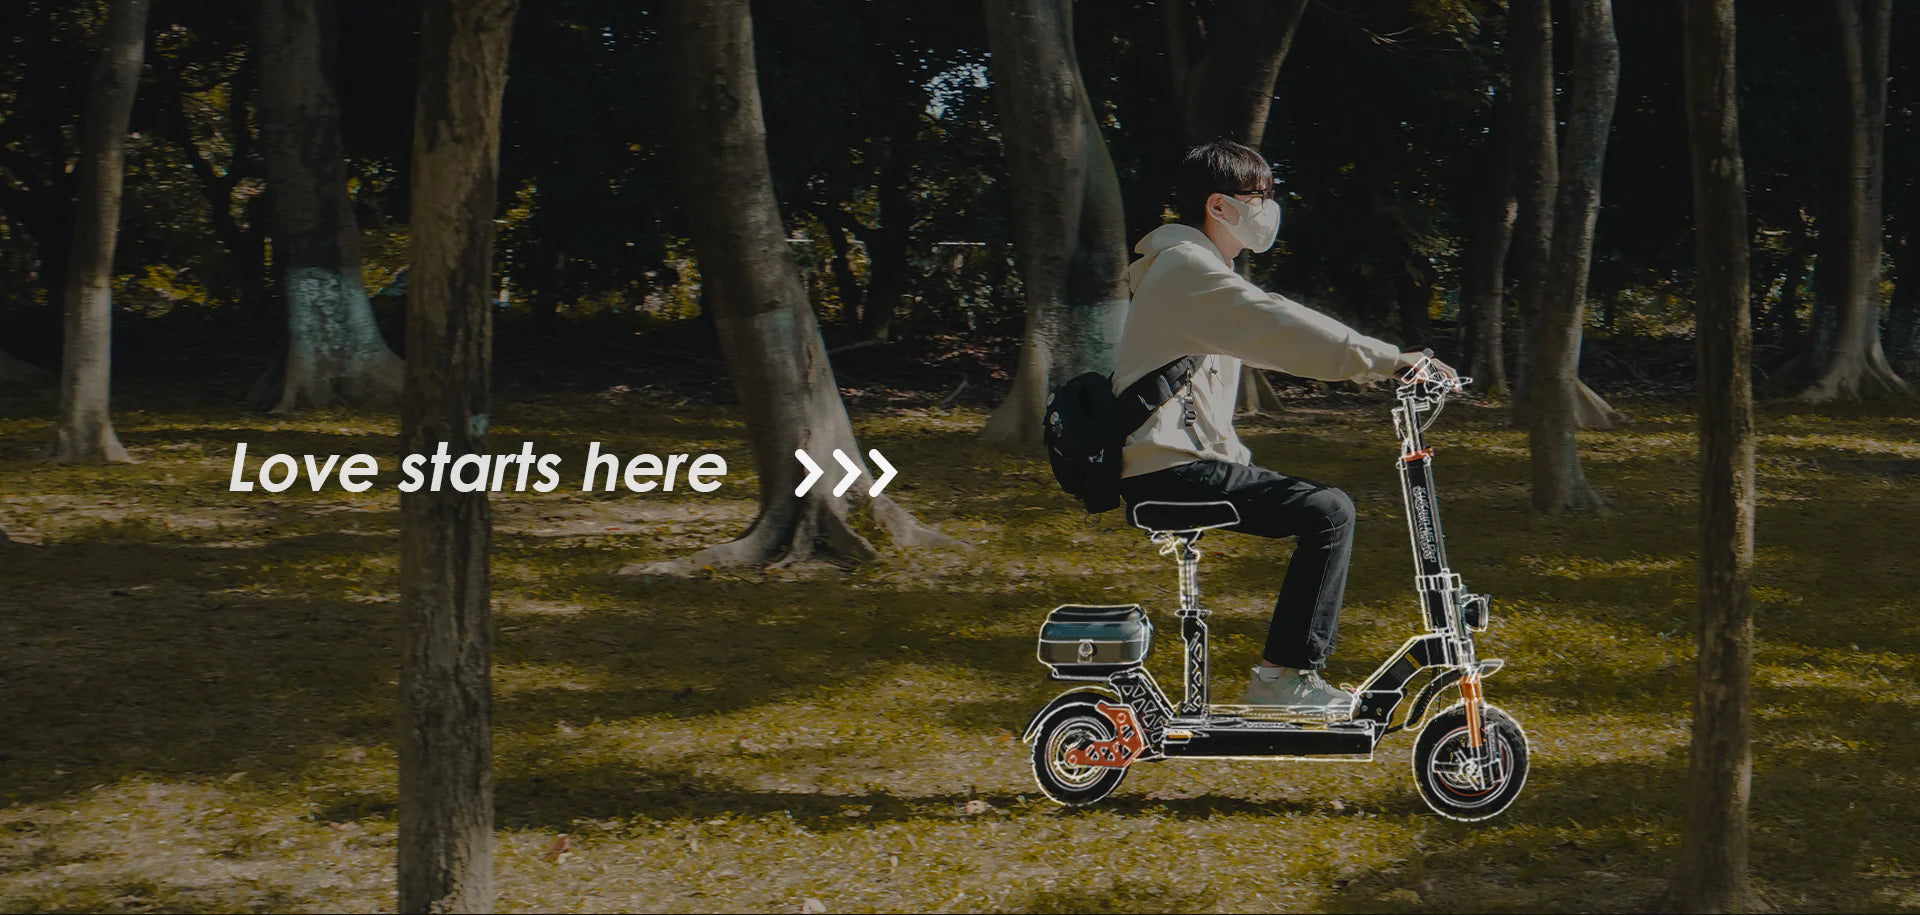 Conquer Any Terrain with KuKirin M5 PRO Electric Scooter - 1000W Motor, 960WH Battery